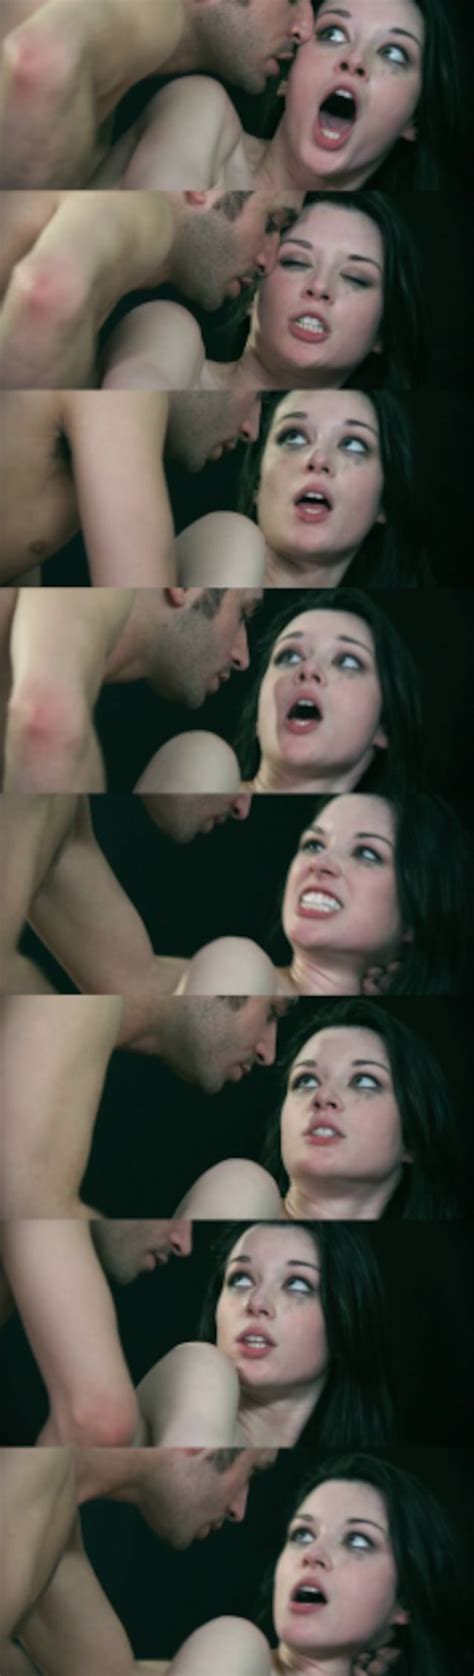 Where Can I Find This Video Stoya 164207 ›